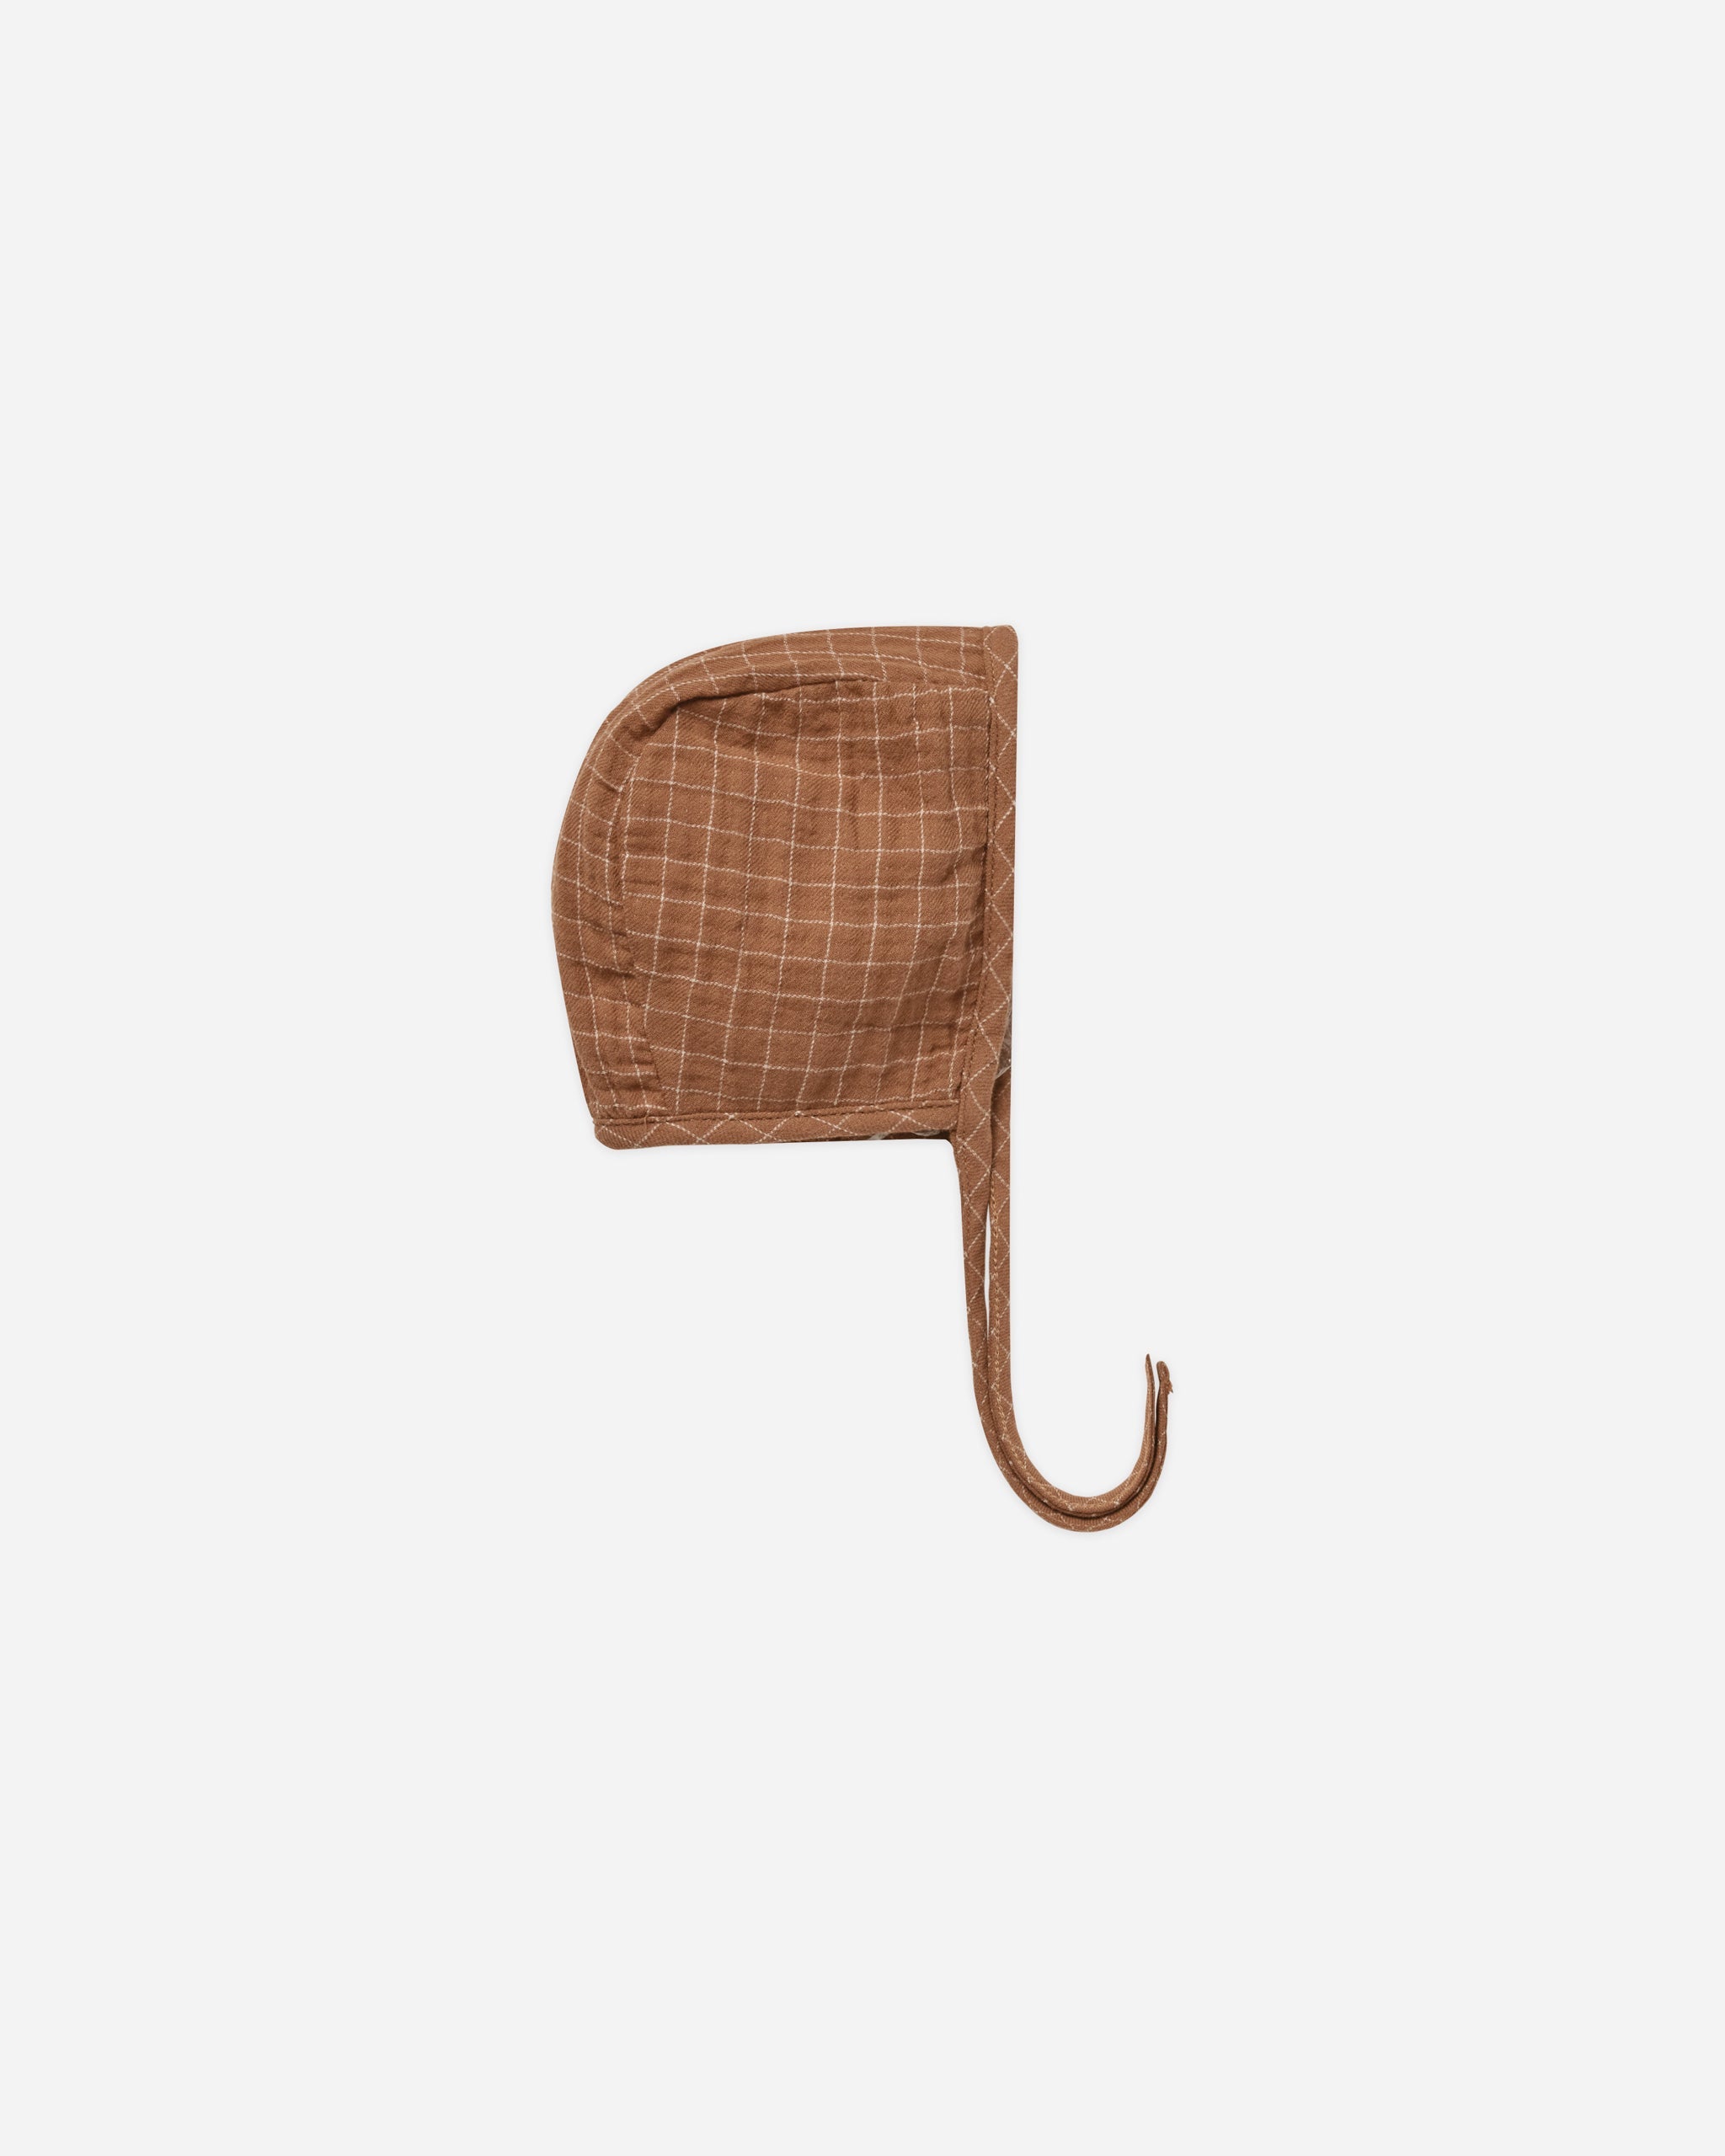 Woven Baby Bonnet || Cinnamon Grid - Rylee + Cru | Kids Clothes | Trendy Baby Clothes | Modern Infant Outfits |